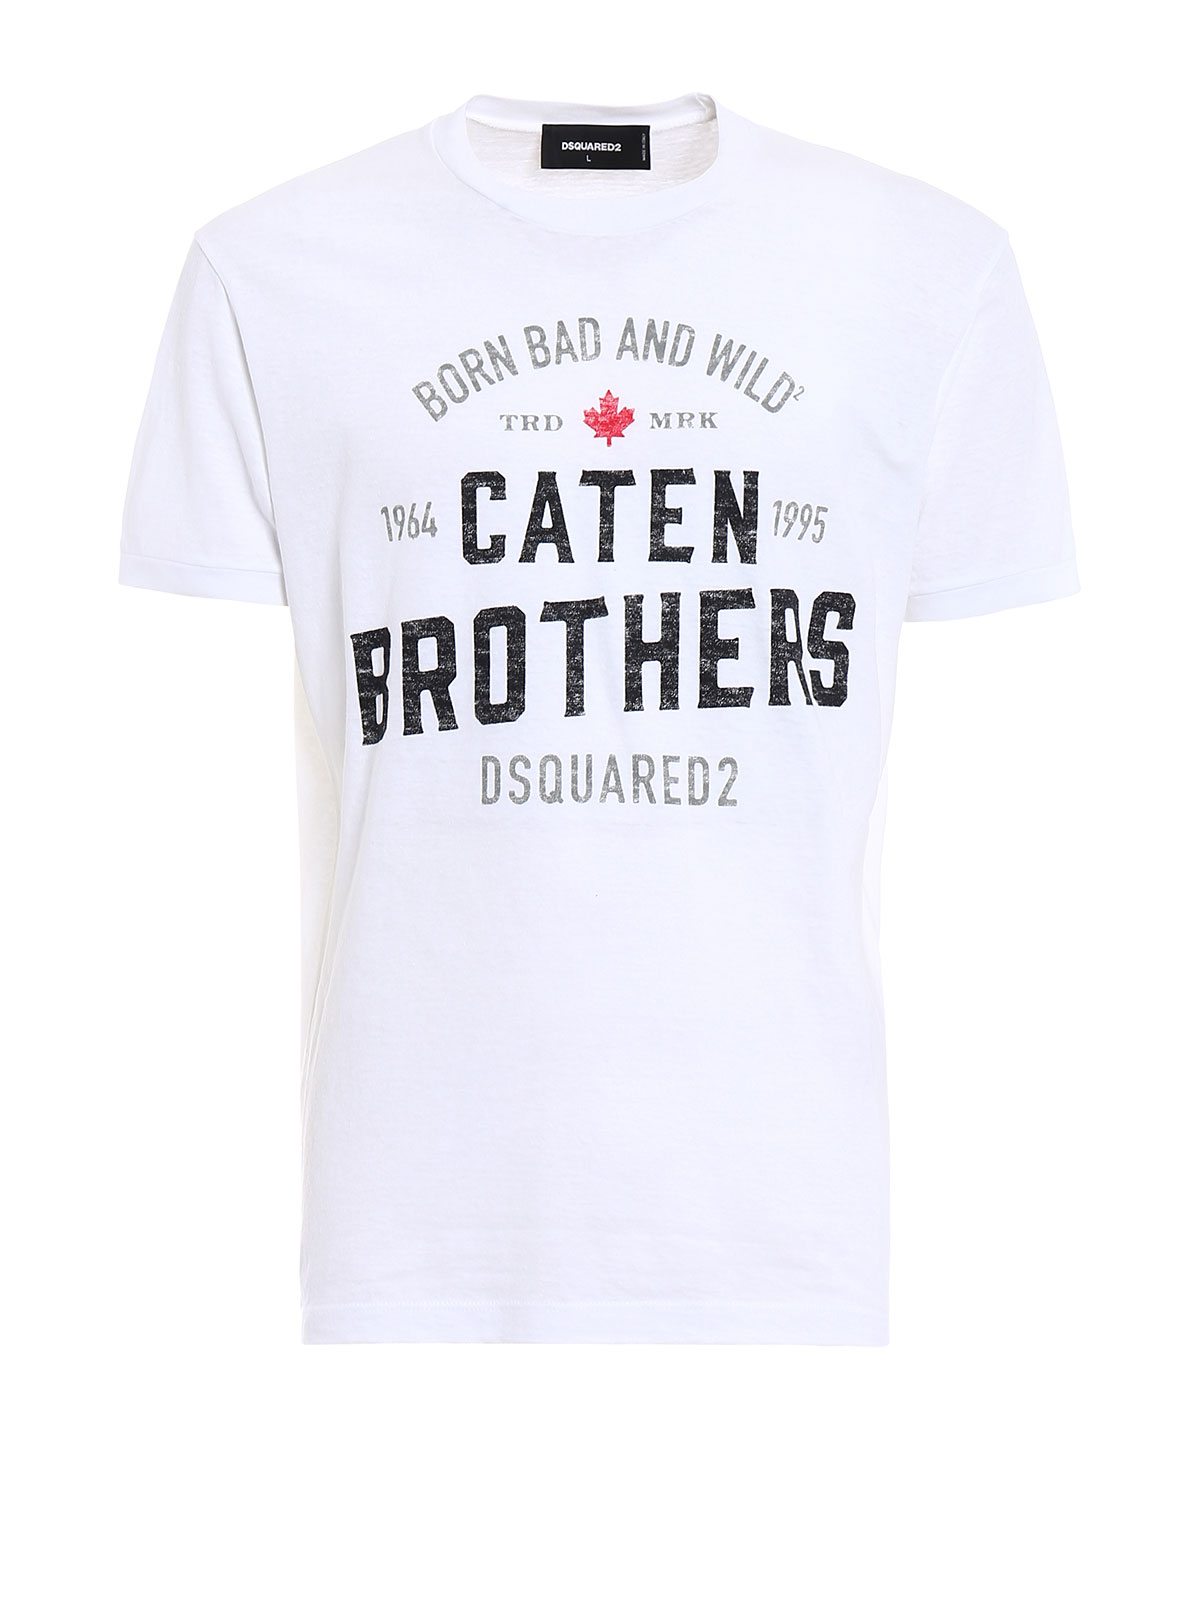 dsquared2 caten brothers t shirt